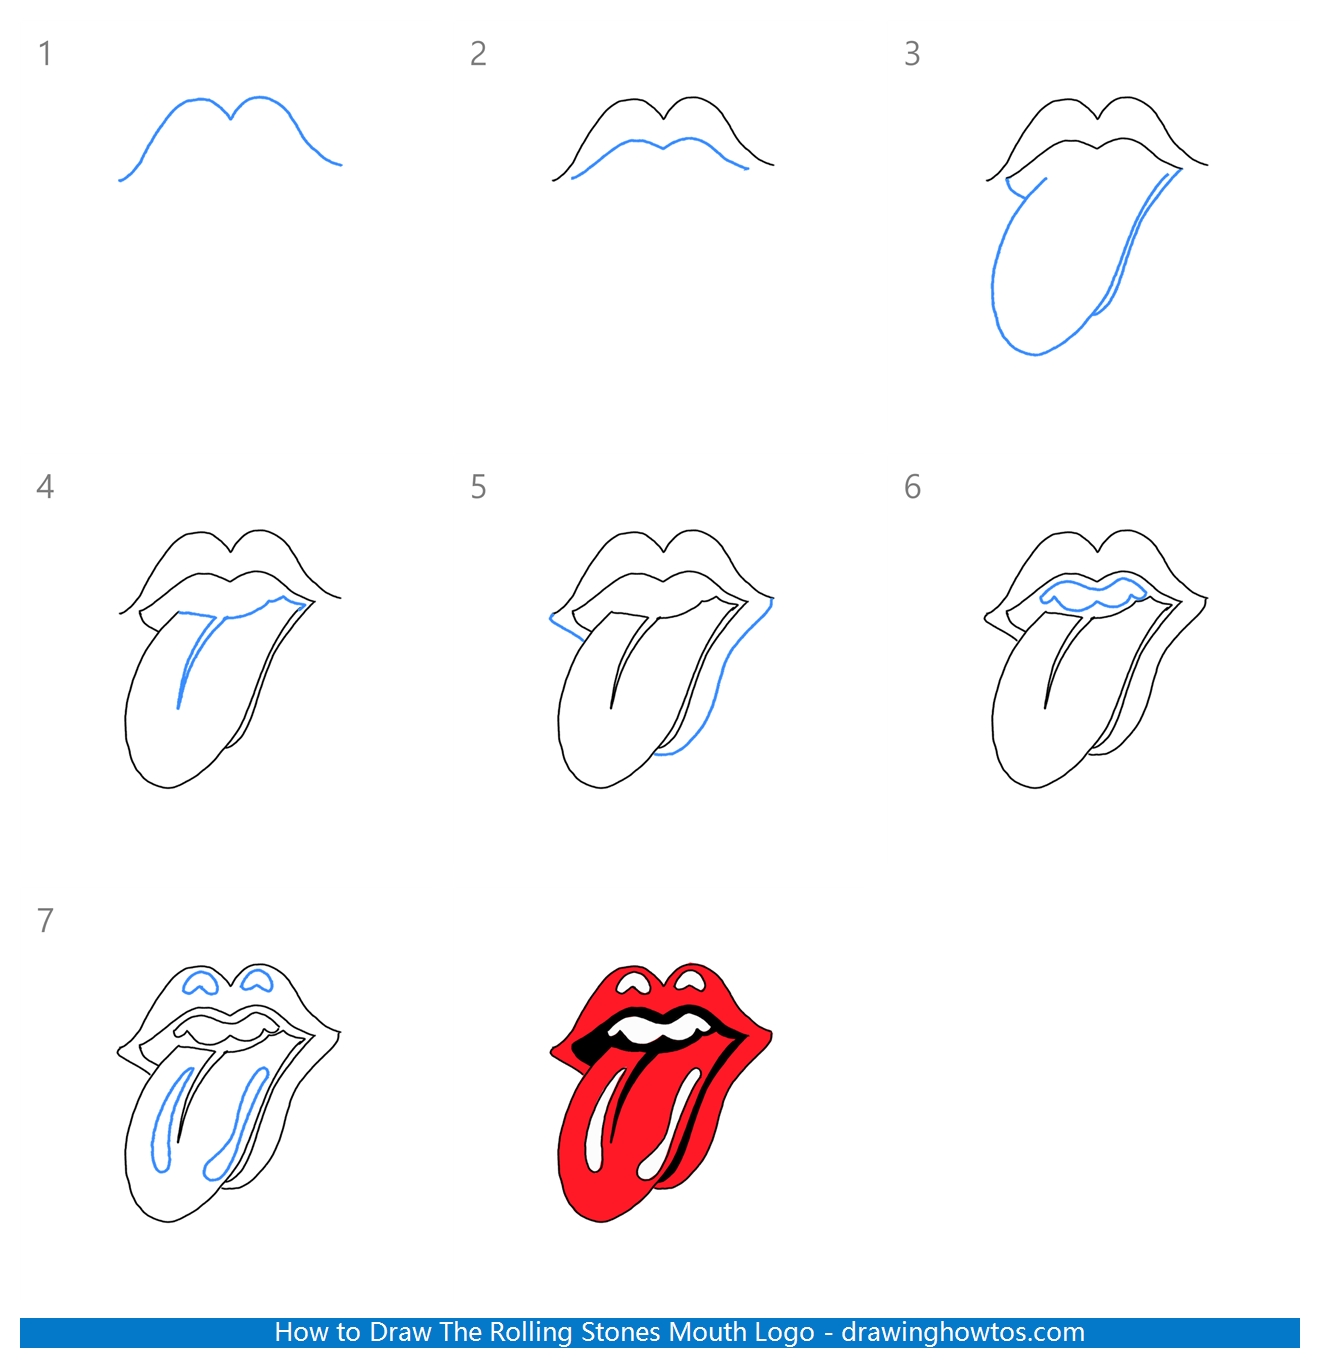 How to Draw The Rolling Stones Mouth Logo Step by Step